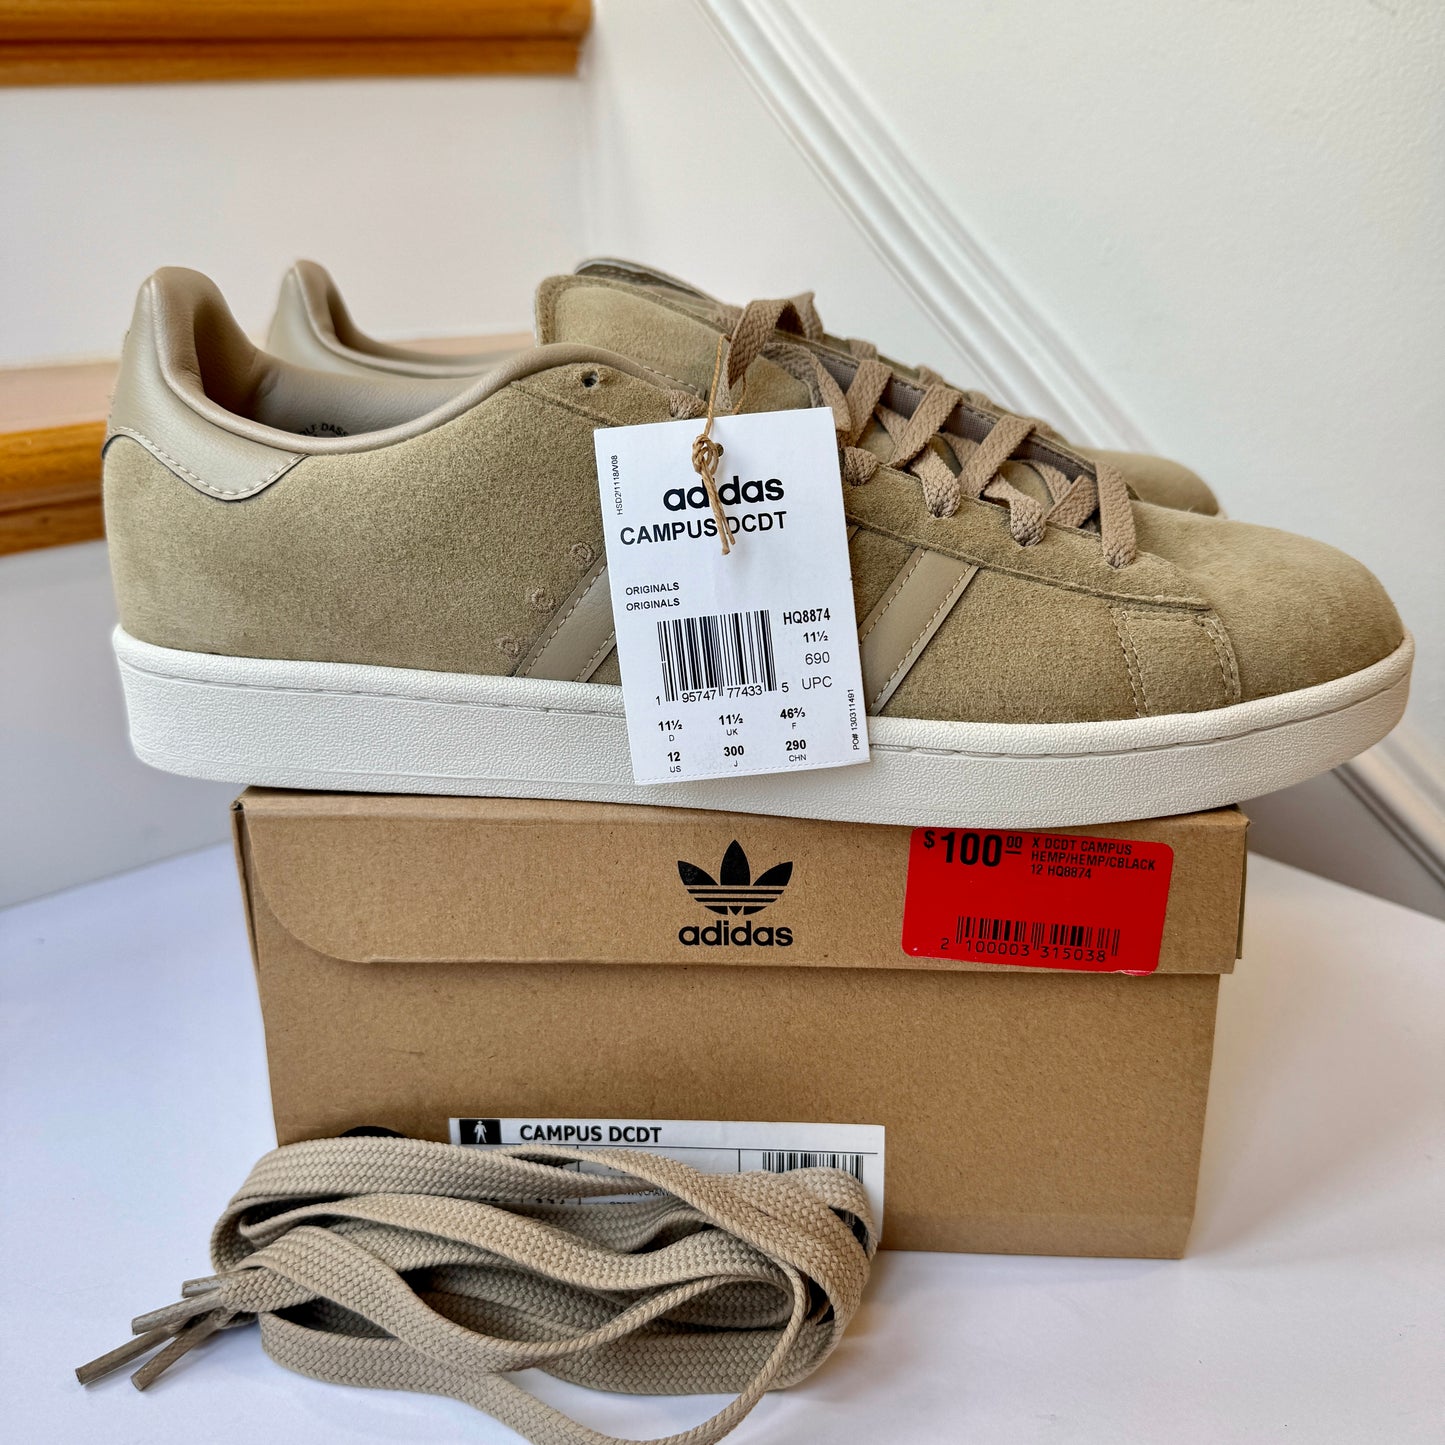 Adidas x DCDT Campus Collab sneakers hemp light brown beige shoes leather